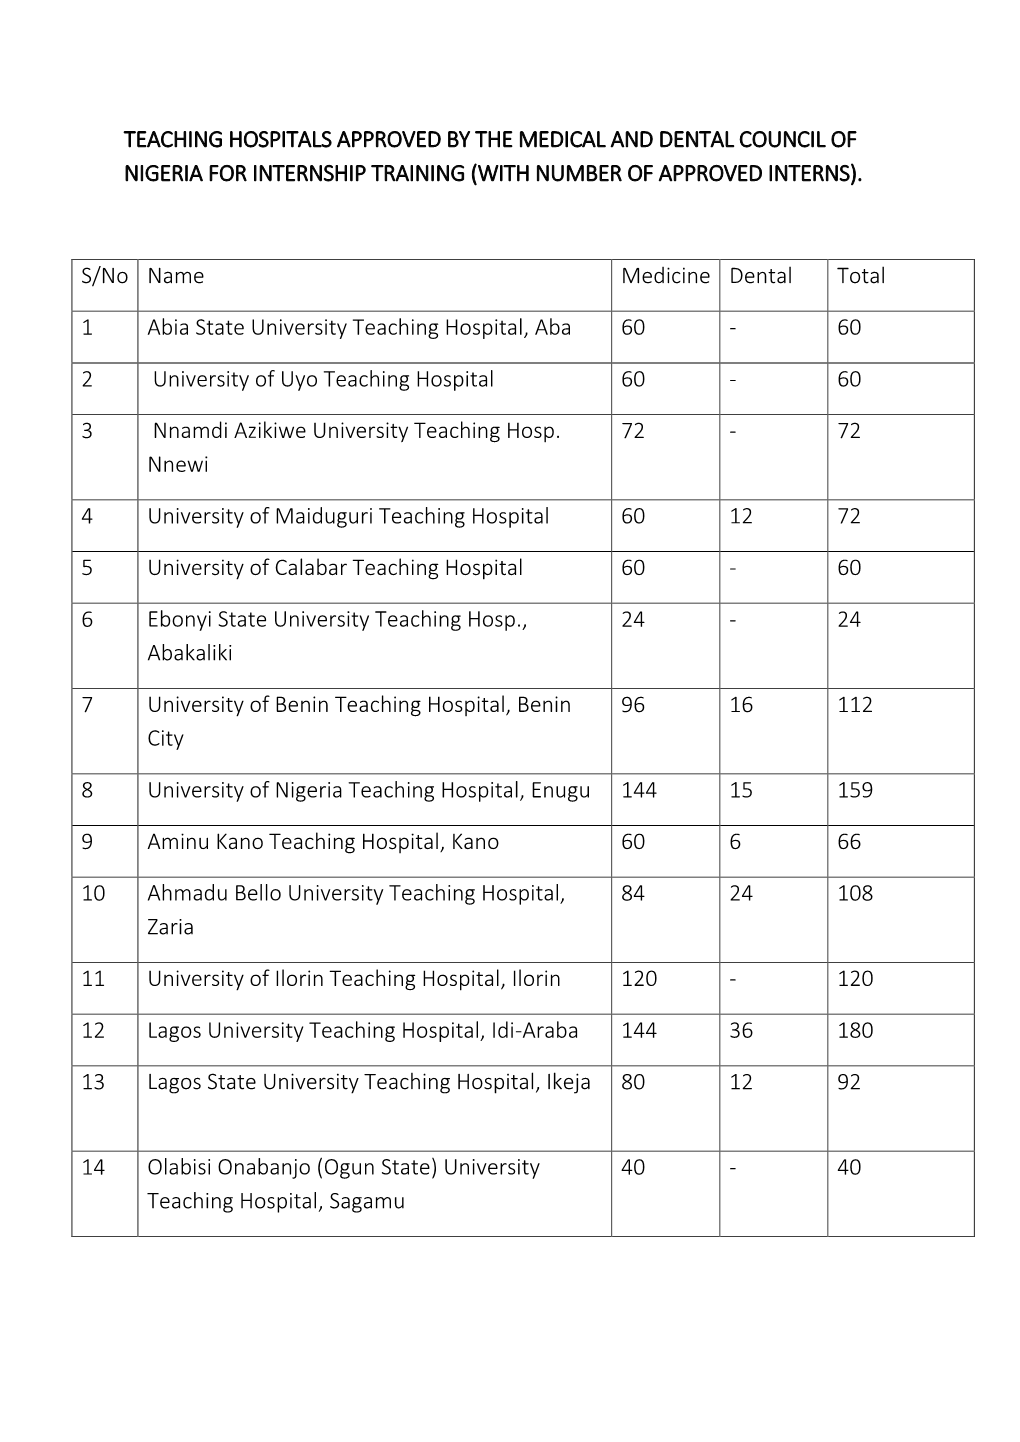 Teaching Hospitals Approved by the Medical and Dental Council of Nigeria for Internship Training (With Number of Approved Interns)